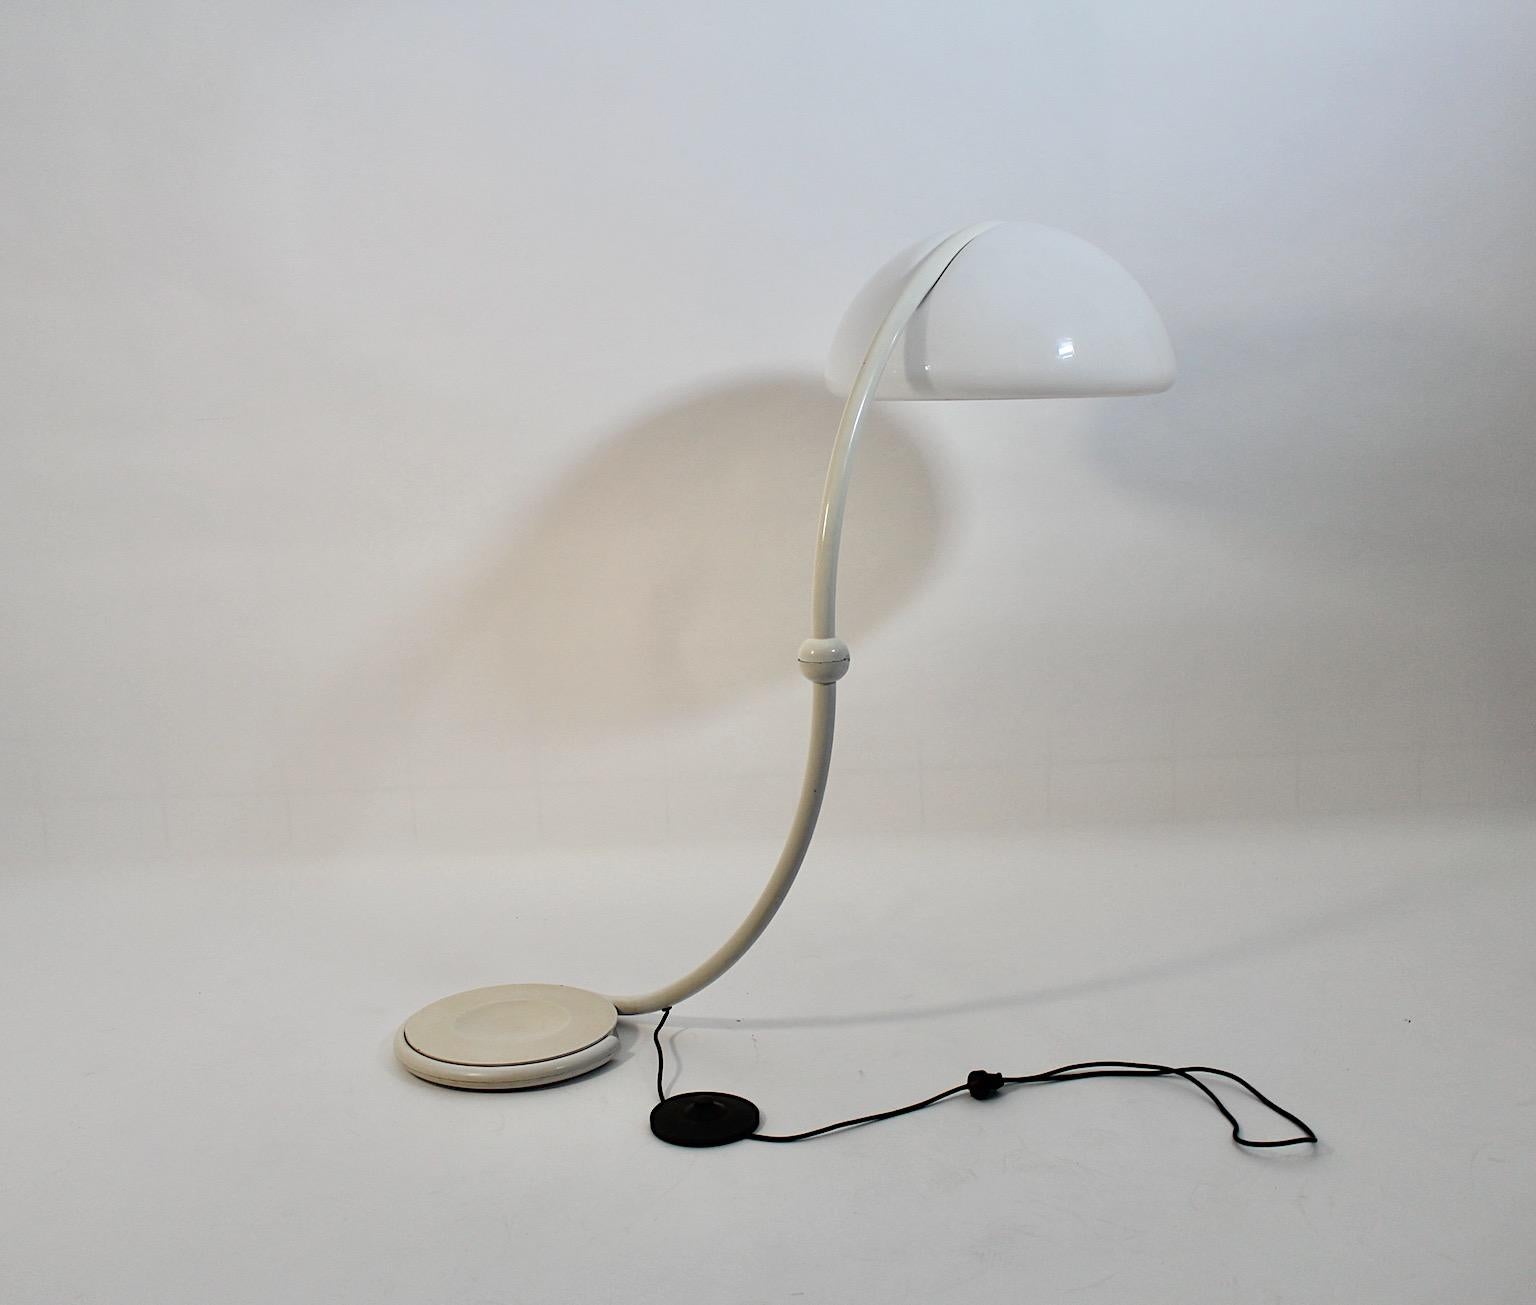 Space Age Vintage Floor Lamp White Plastic Metal Elio Martinelli 1970s Italy For Sale 5